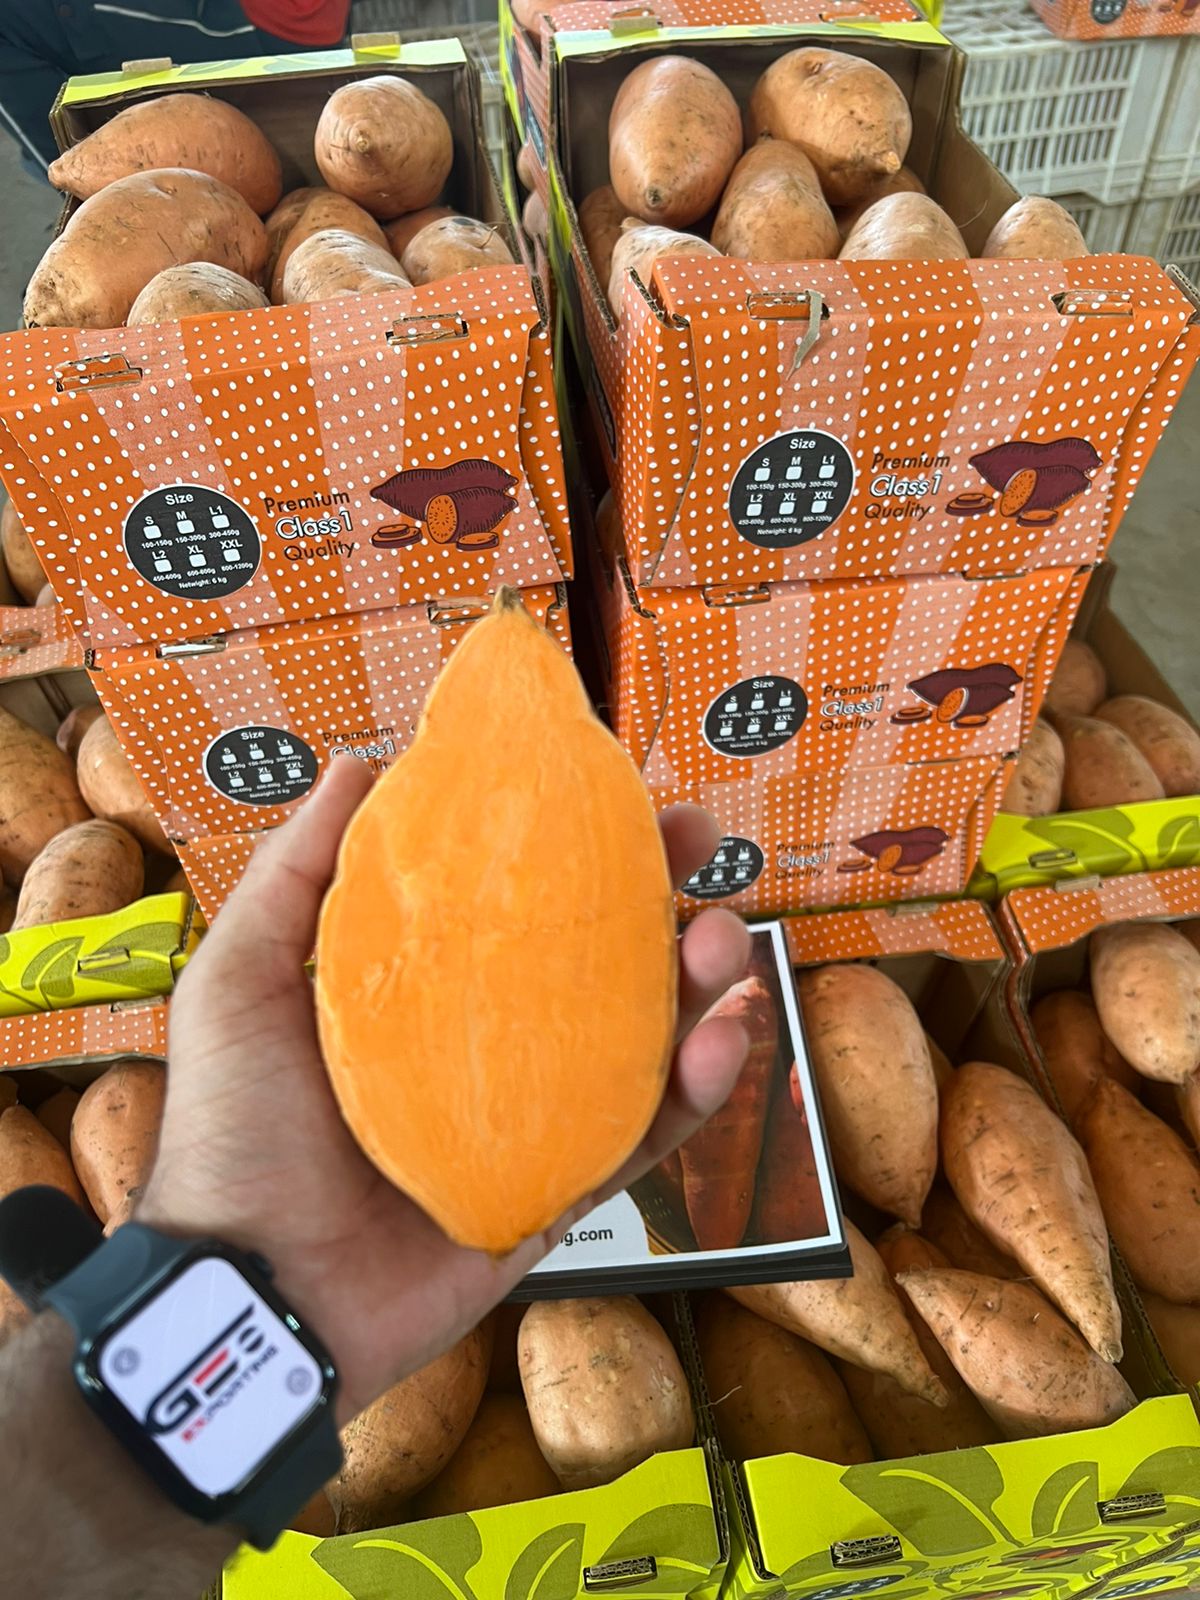 Delicious Bellevue Sweet Potatoes from Egypt